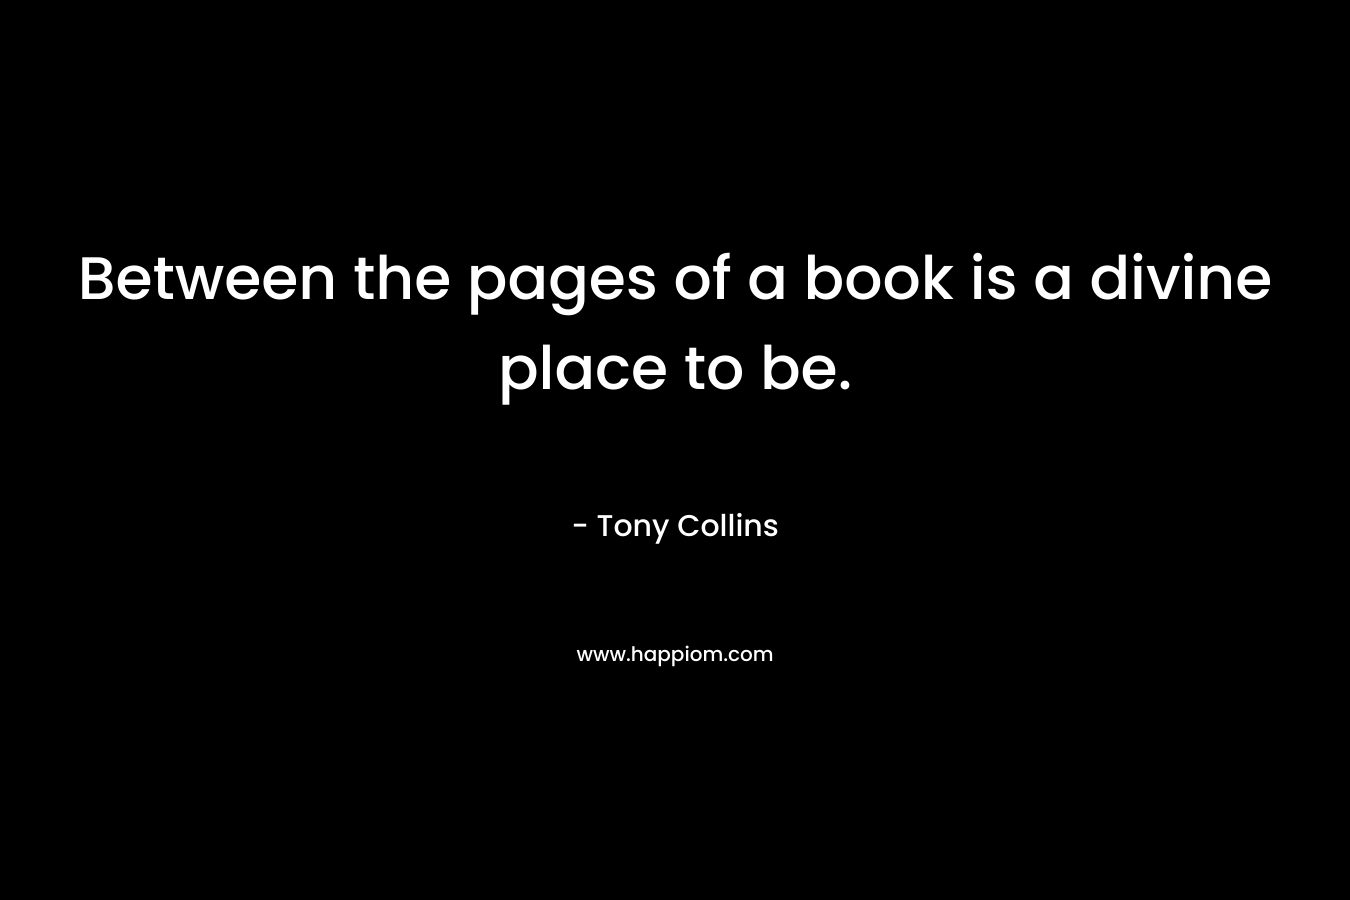 Between the pages of a book is a divine place to be. – Tony Collins